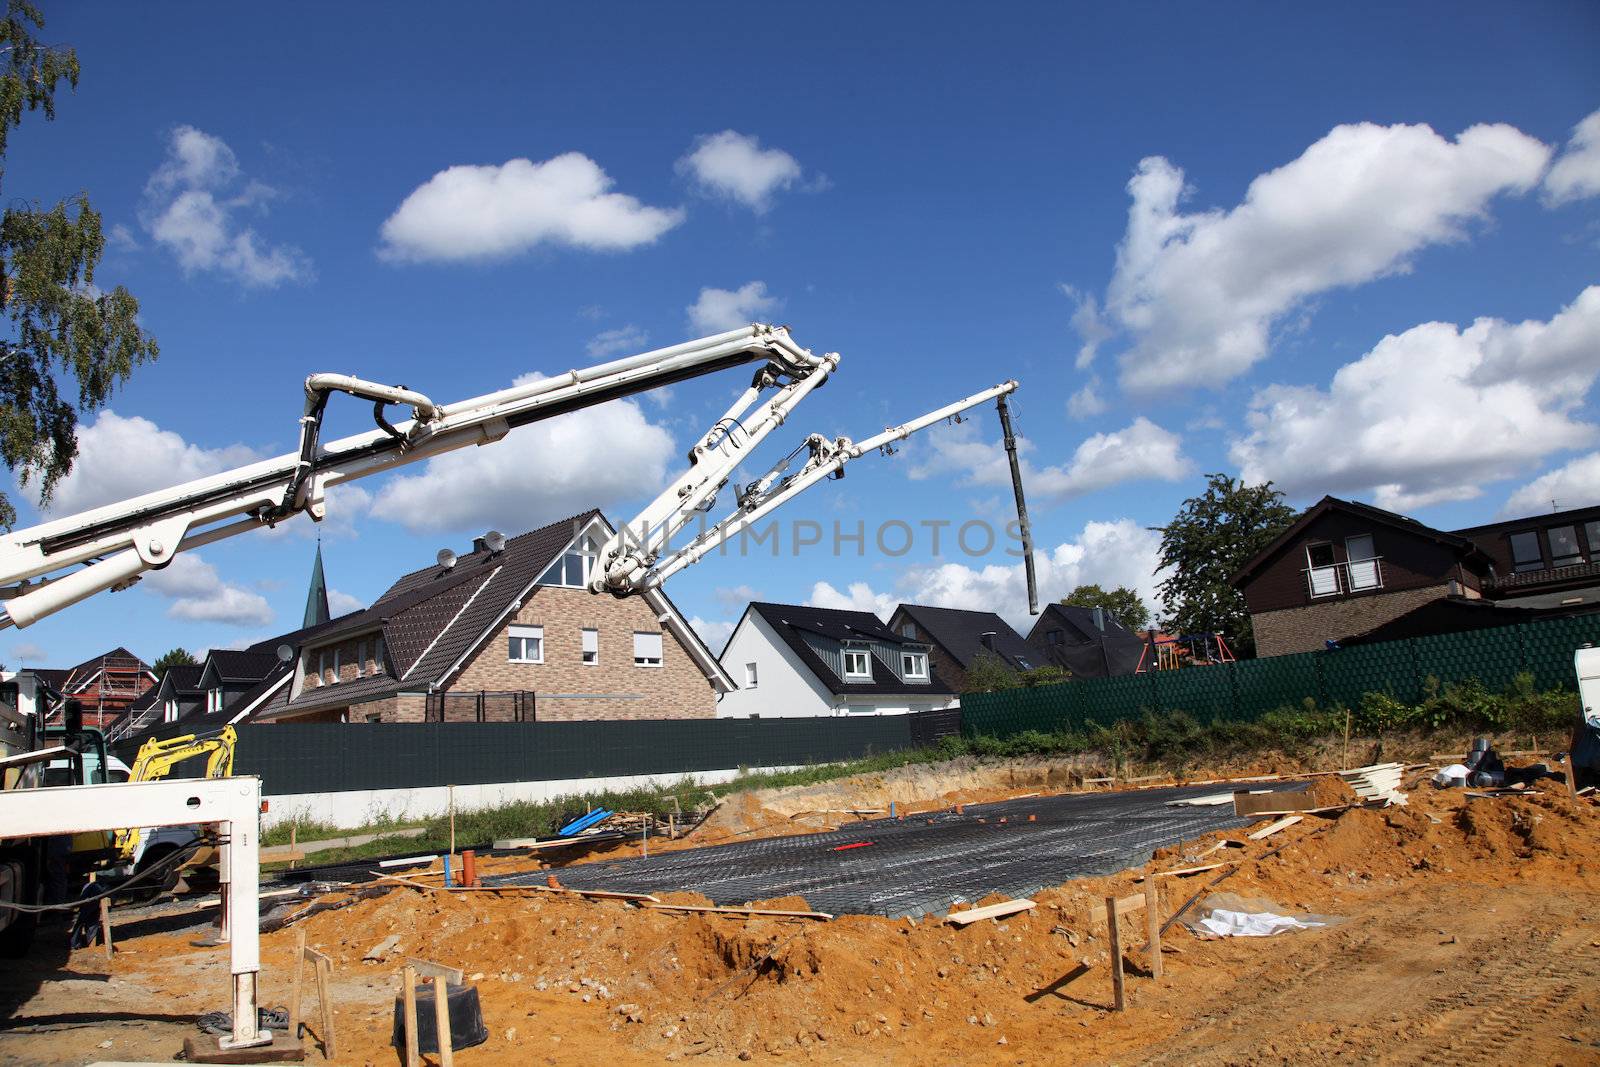 View of a new house building site with a long mechanical arm and tube for pouring ready mixed concrete for the foundation and floor 